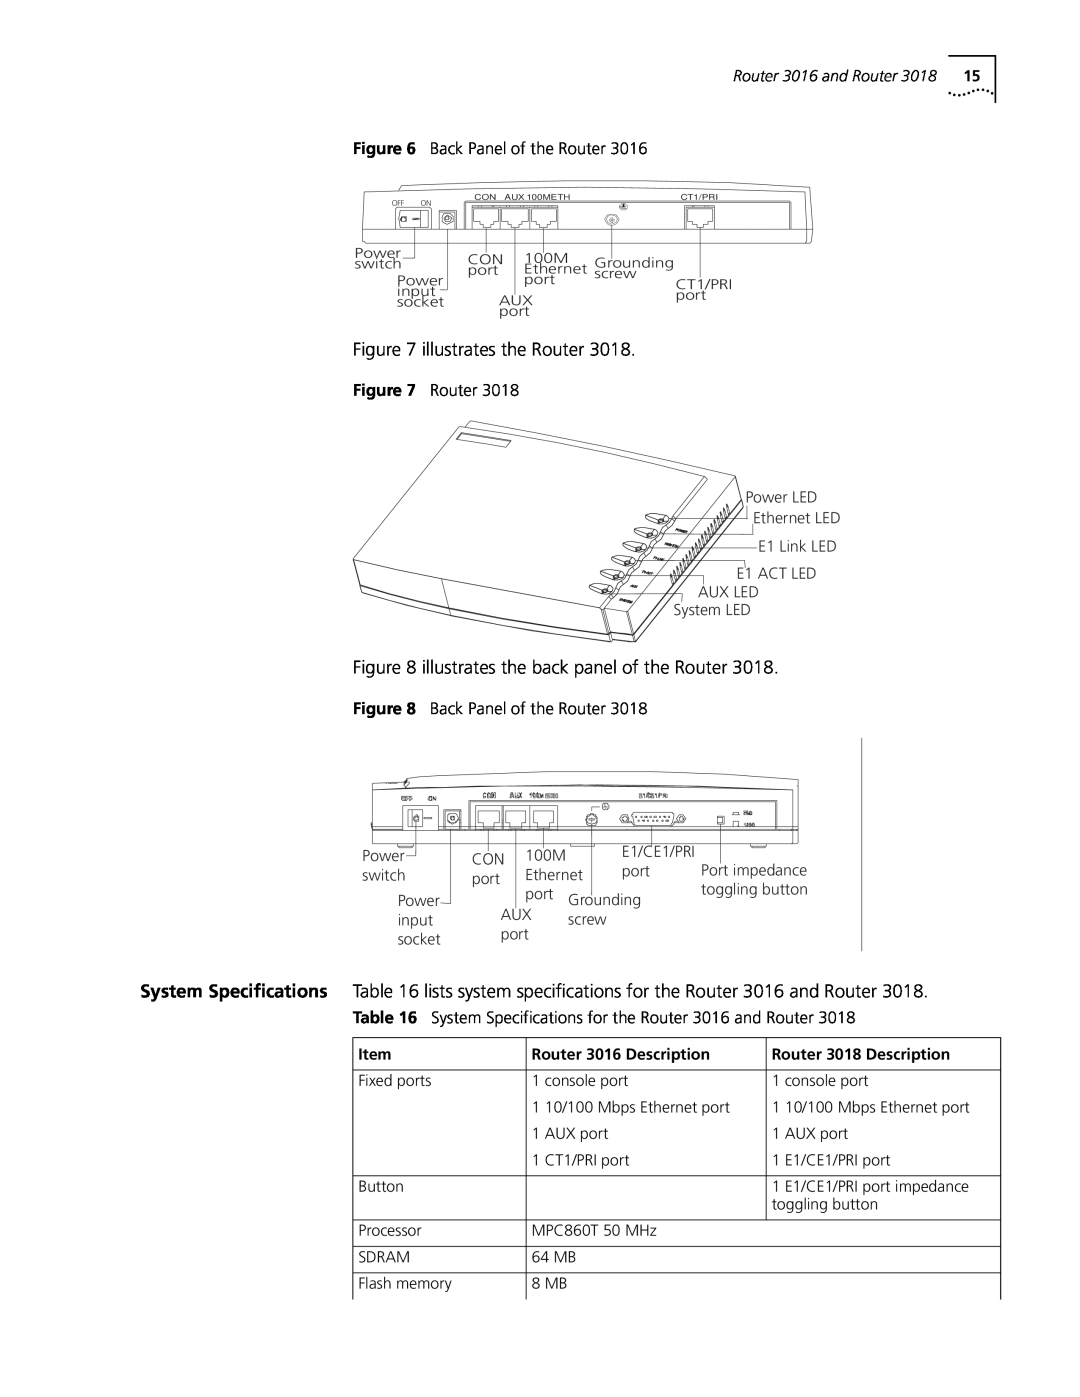 3Com 3015 (3C13615), 3013 (3C13613) manual Back Panel of the Router, System Specifications for the Router 3016 and Router 